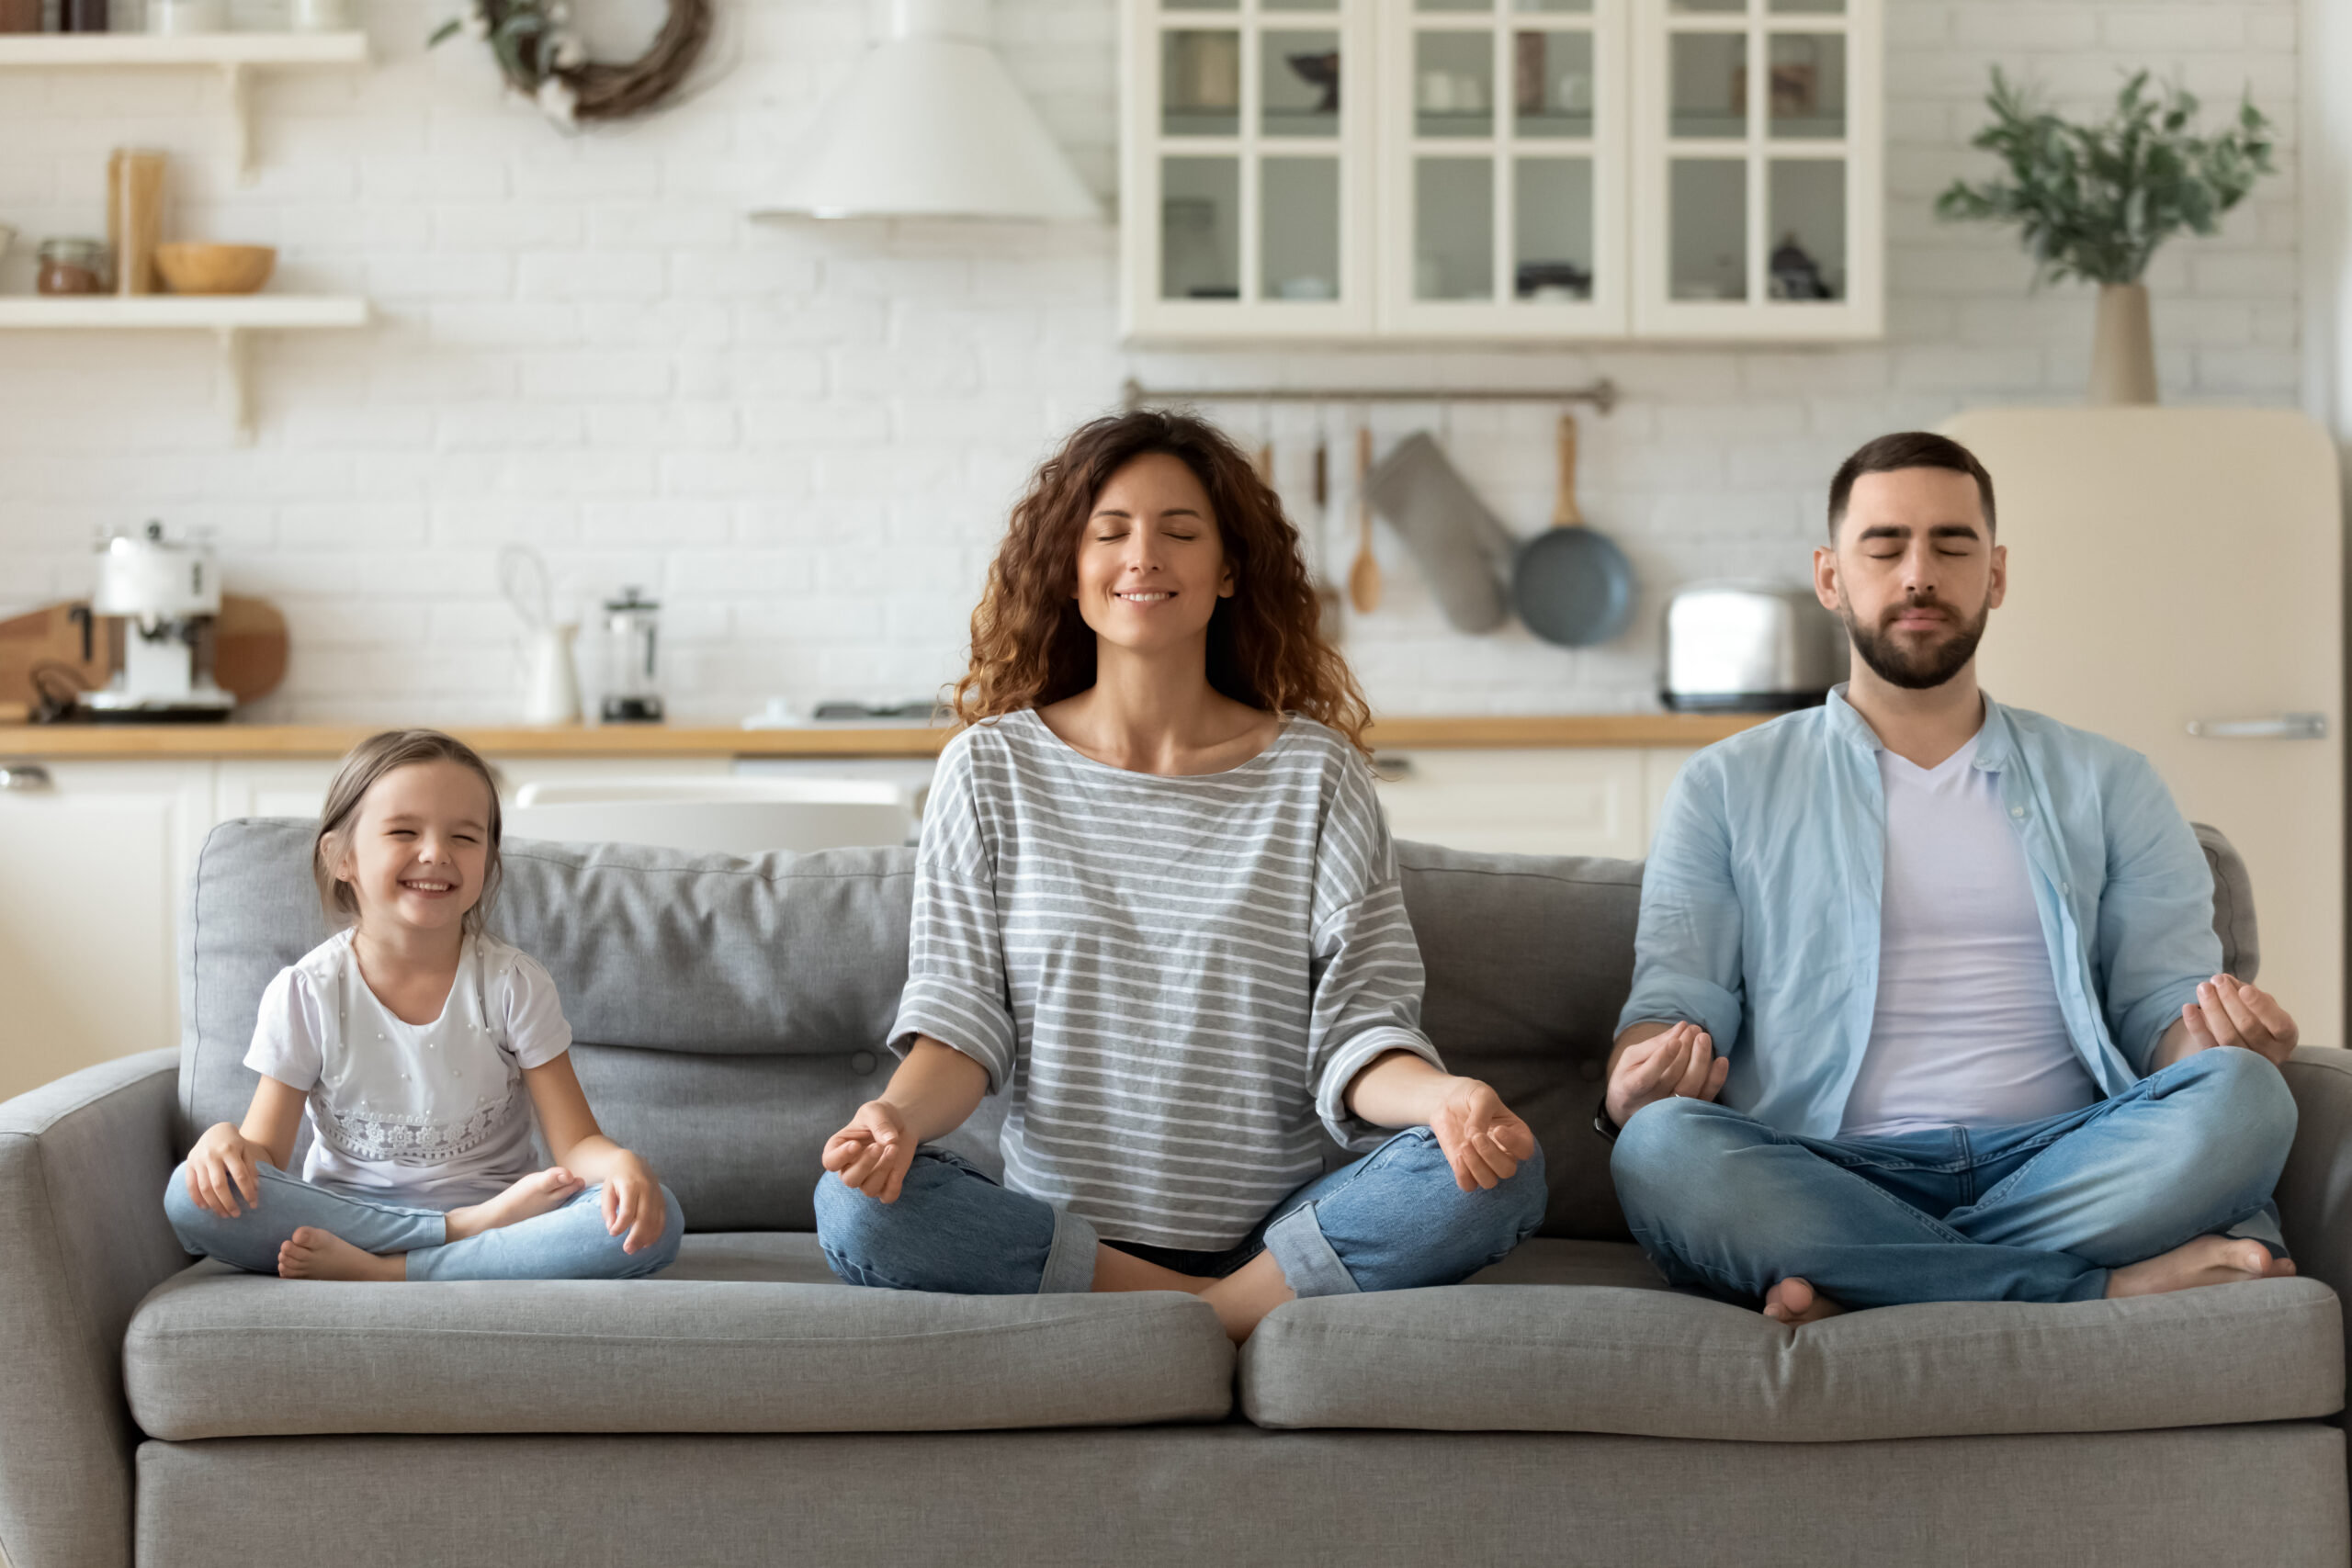 Practicing meditation can be a fun way for the whole family to relax, and improve brain health.